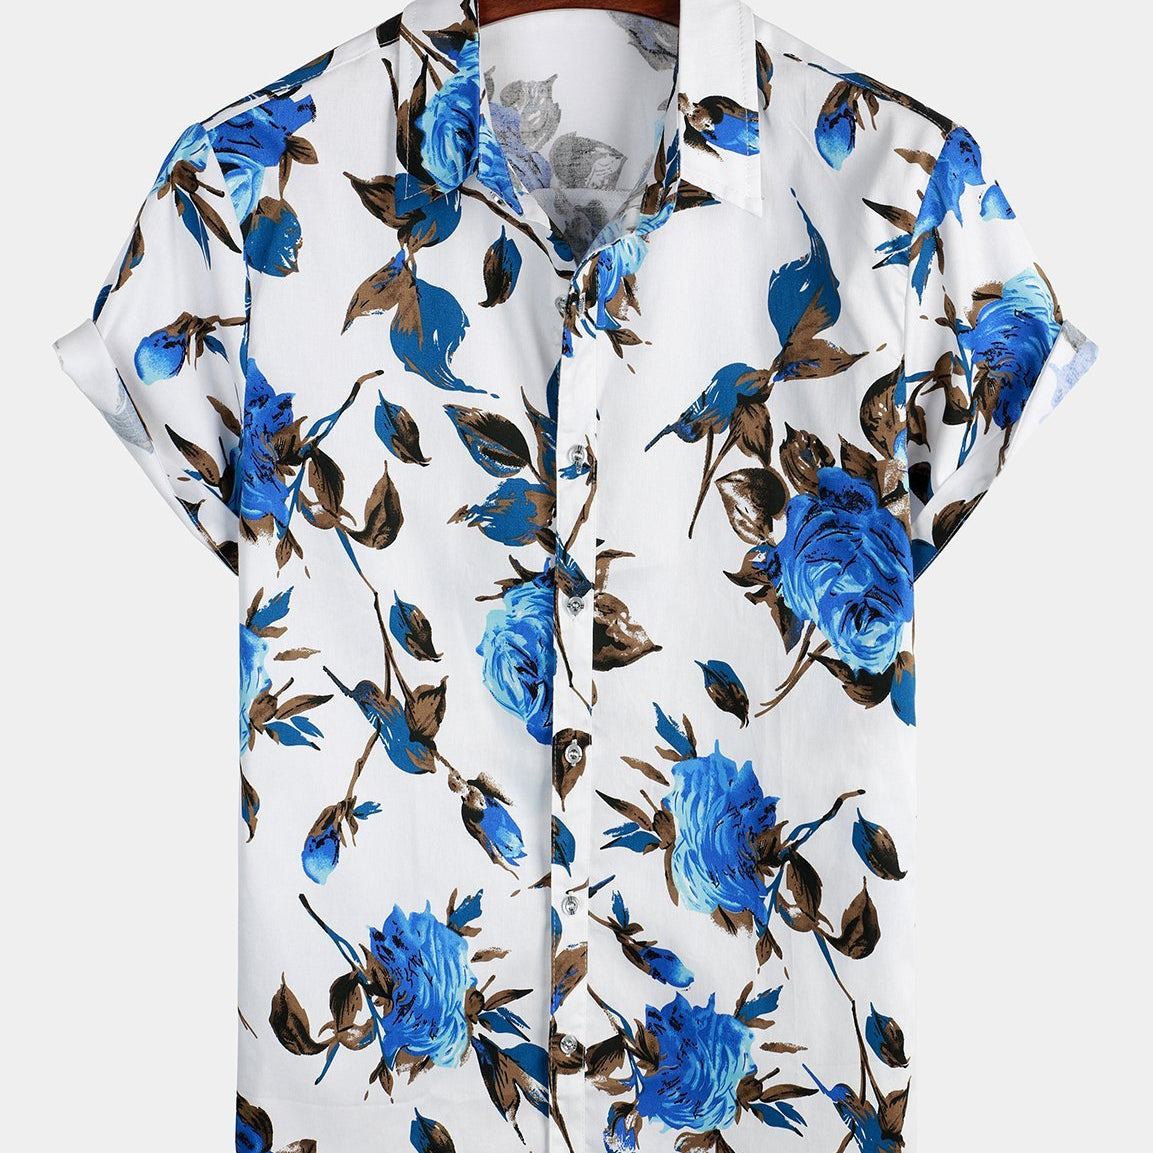 Men's Floral Printed Casual Cotton Short Sleeve Shirt